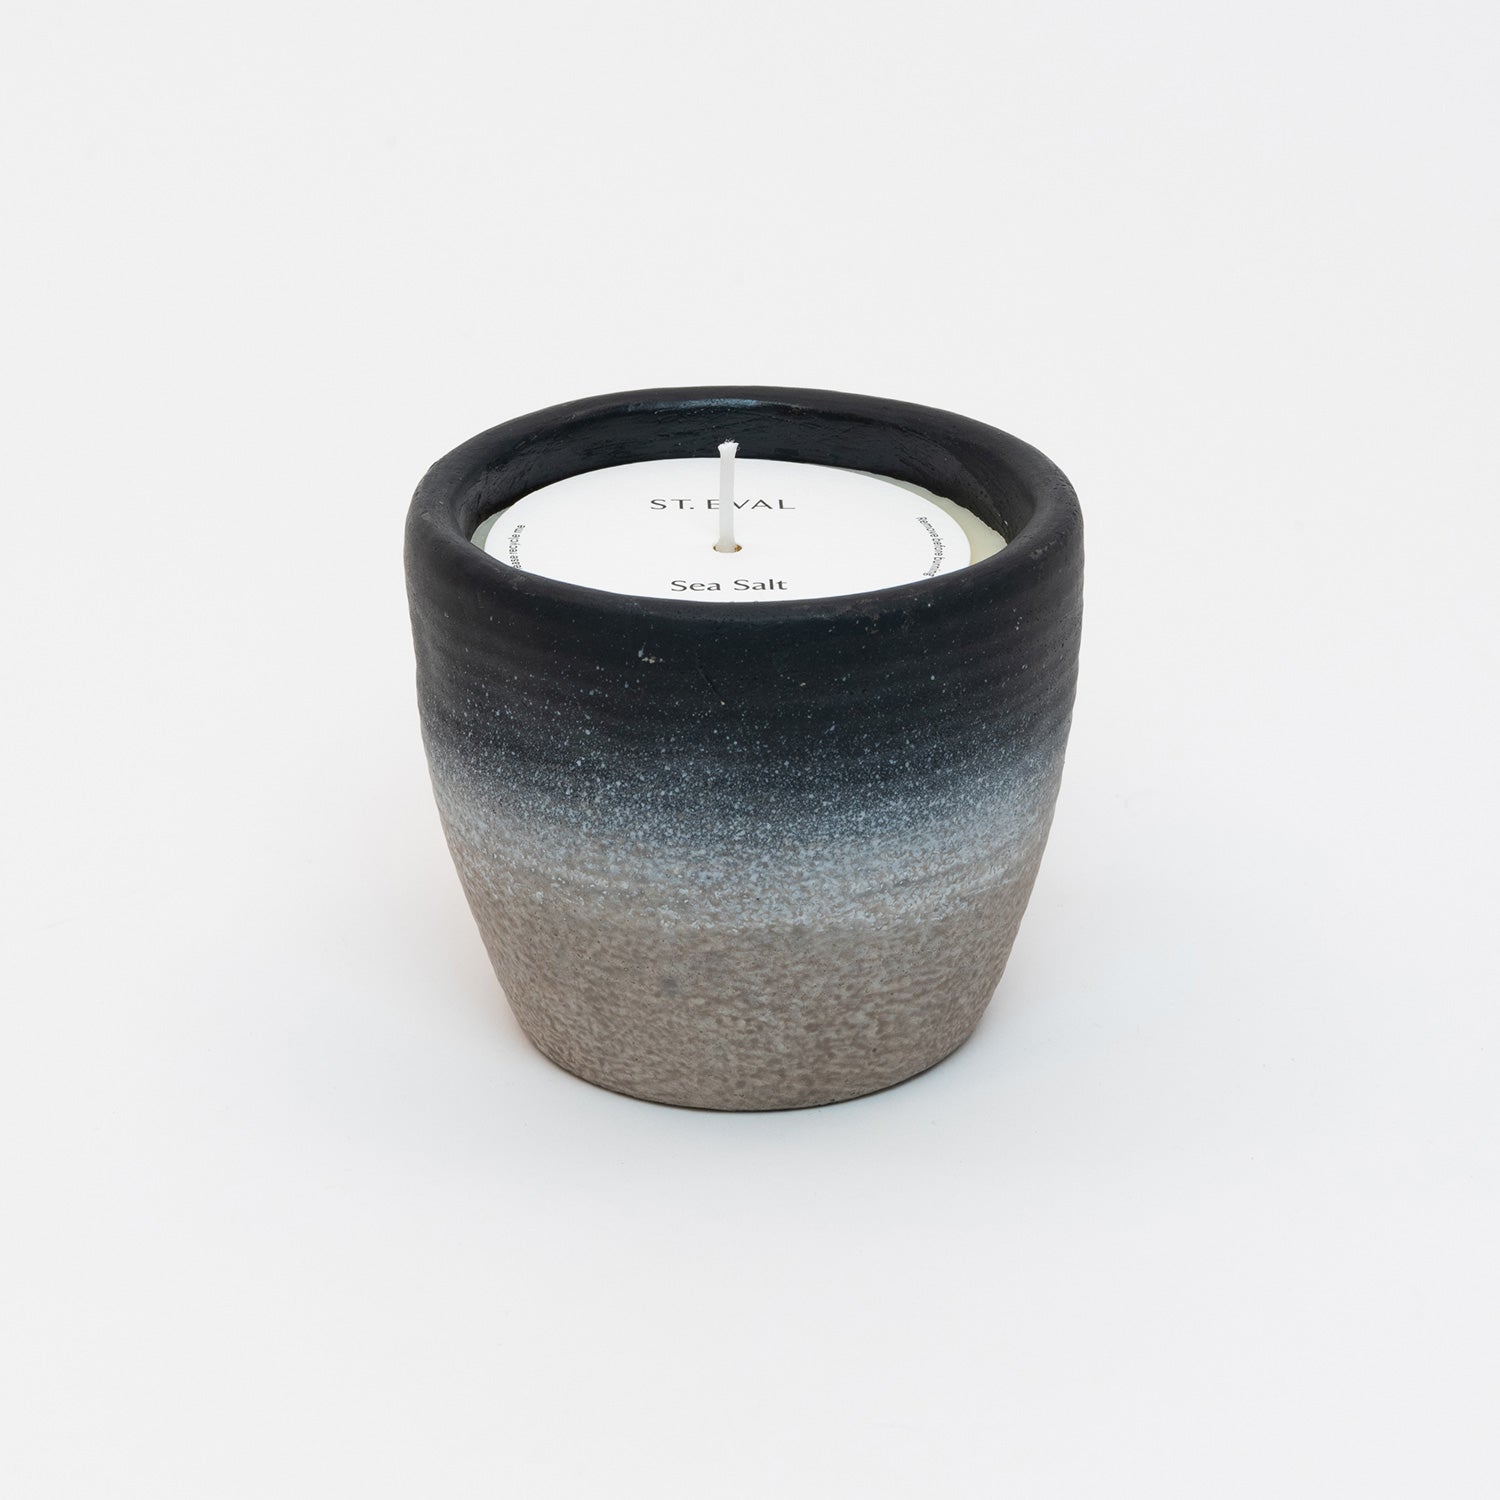 St Eval Sea Salt Small Coastal Candle in heavy stoneware pot. Natural stone clay base fading into a deep navy blue ring at top of pot. St Eval card circle protector on top of candle with wick standing tall.